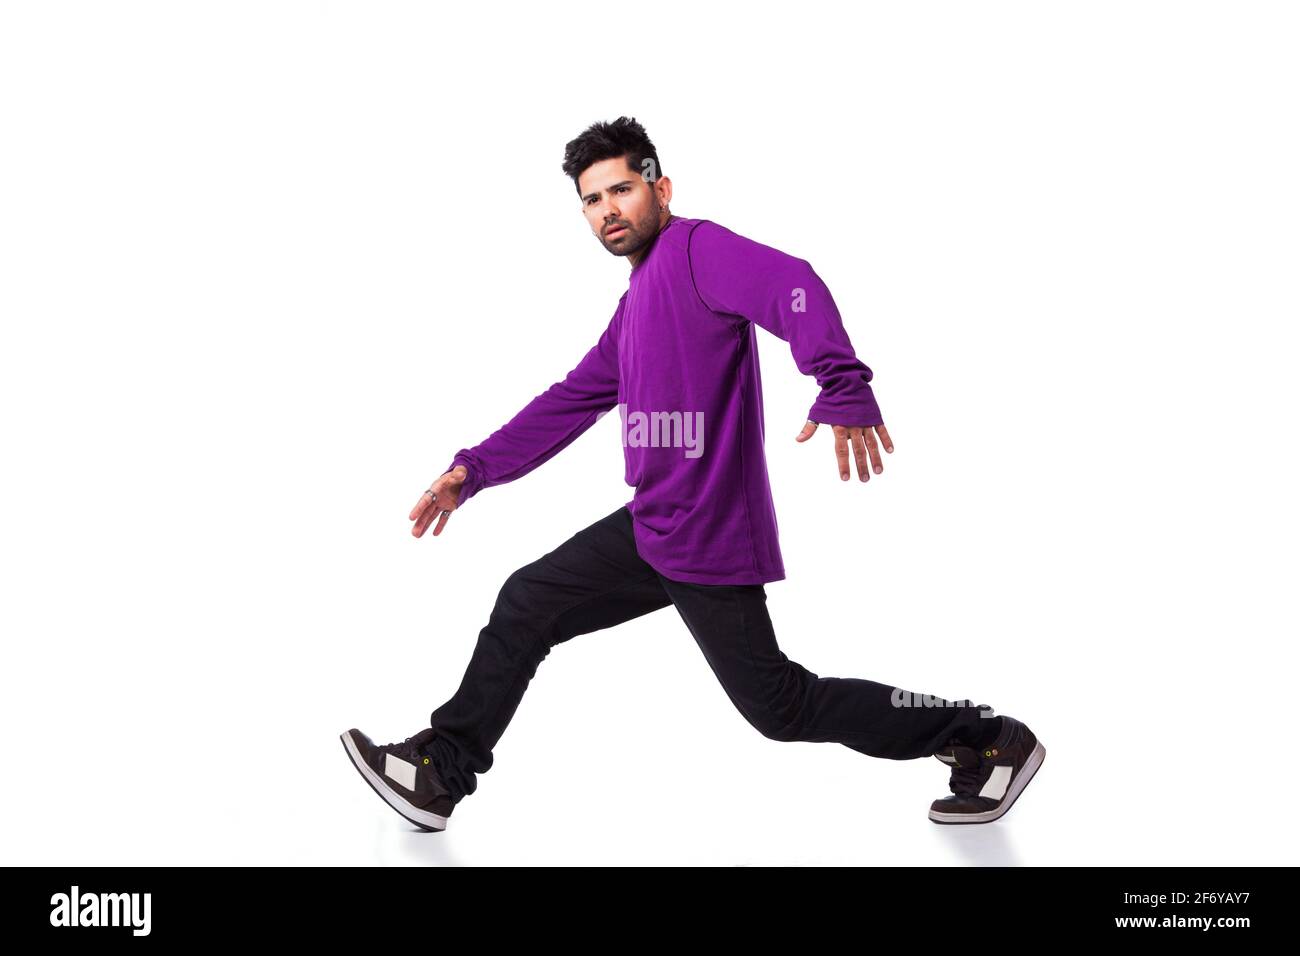 hip hop dancer performing move isolated over white background Stock Photo